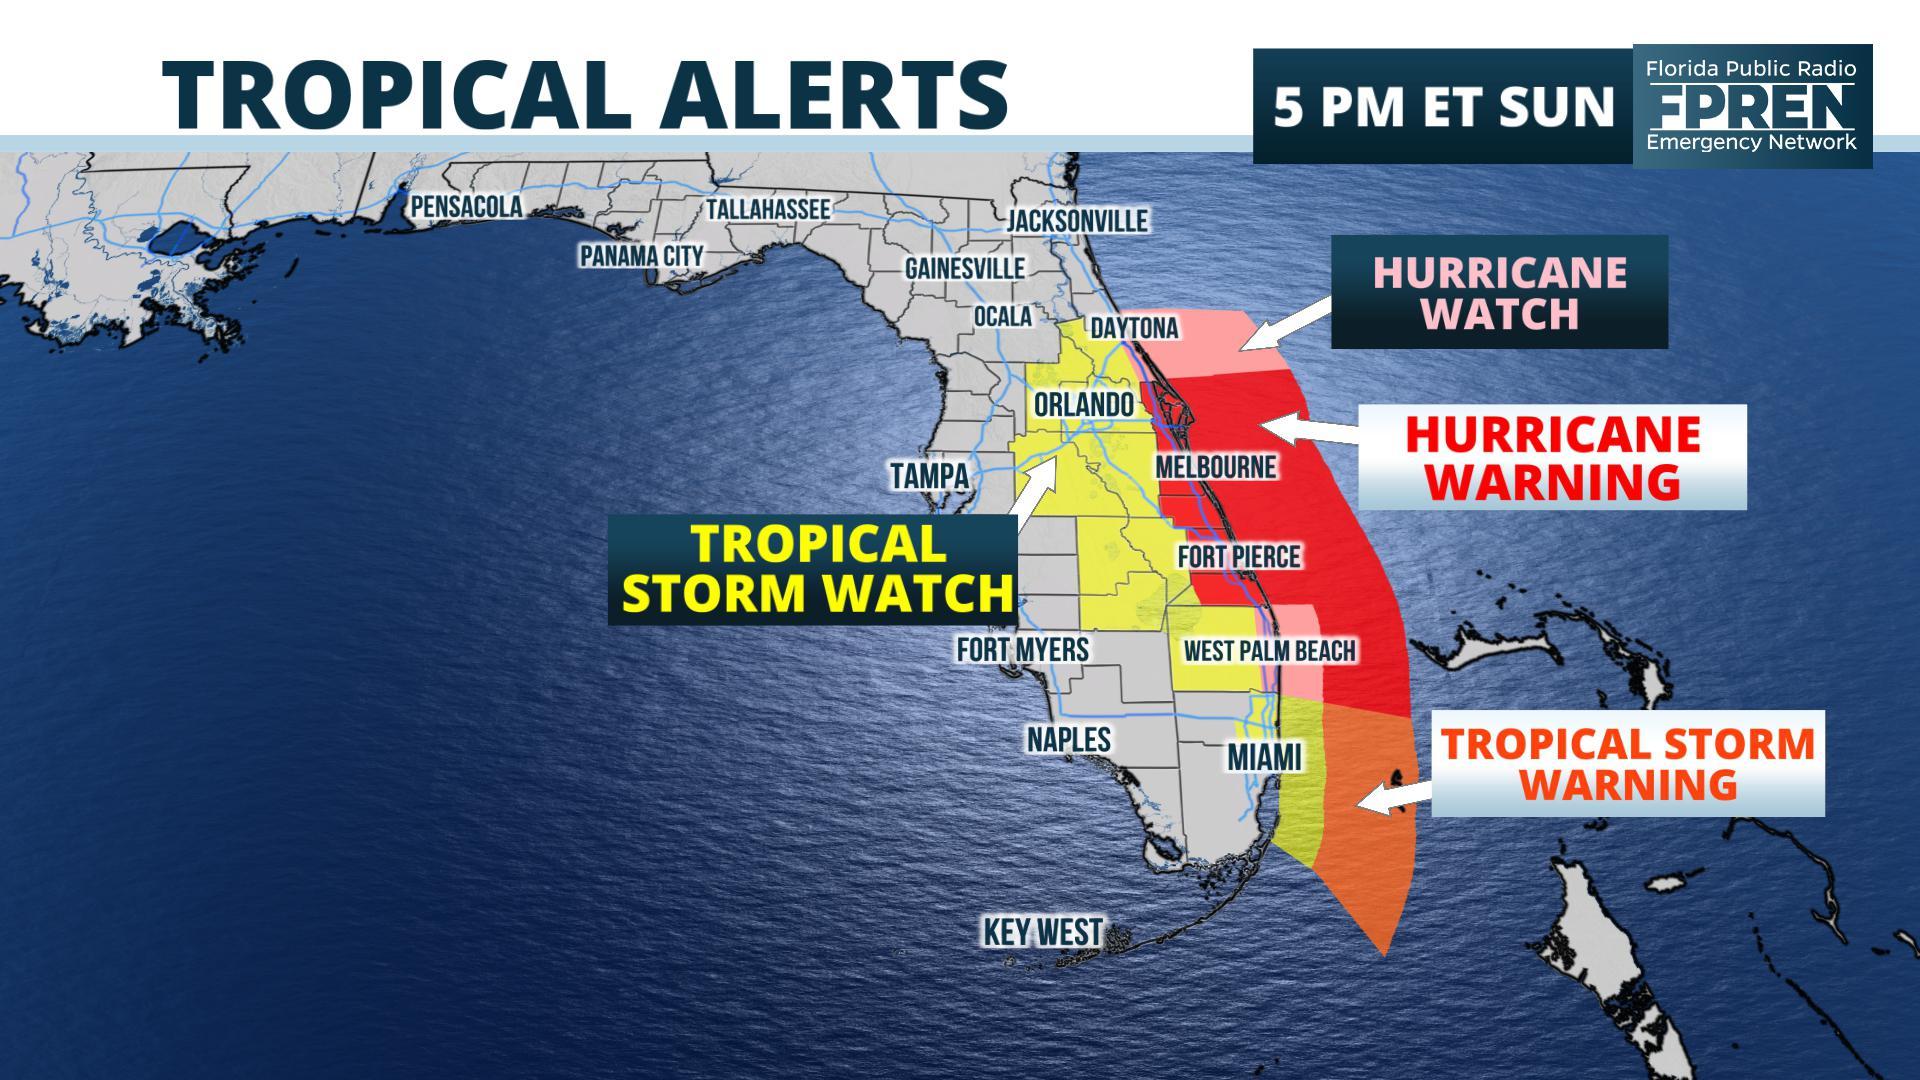 Hurricane Warnings Issued for Florida's Atlantic Coast as Dorian's Track is Nudged West | WJCT NEWS